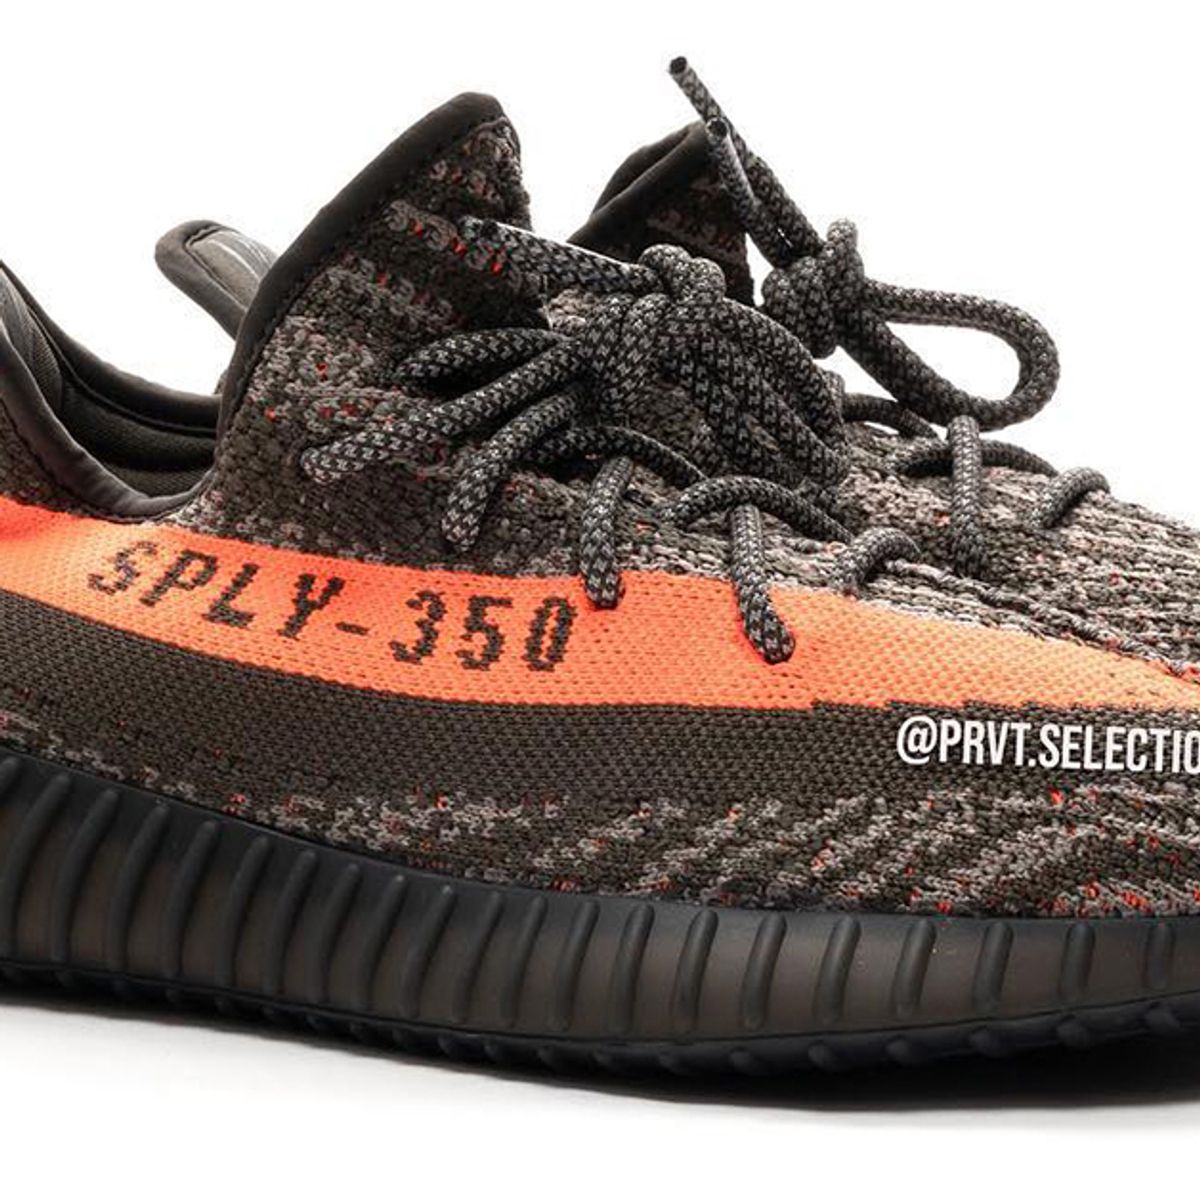 First Look at the adidas Yeezy BOOST 350 V2 3.0' - Sneaker Freaker